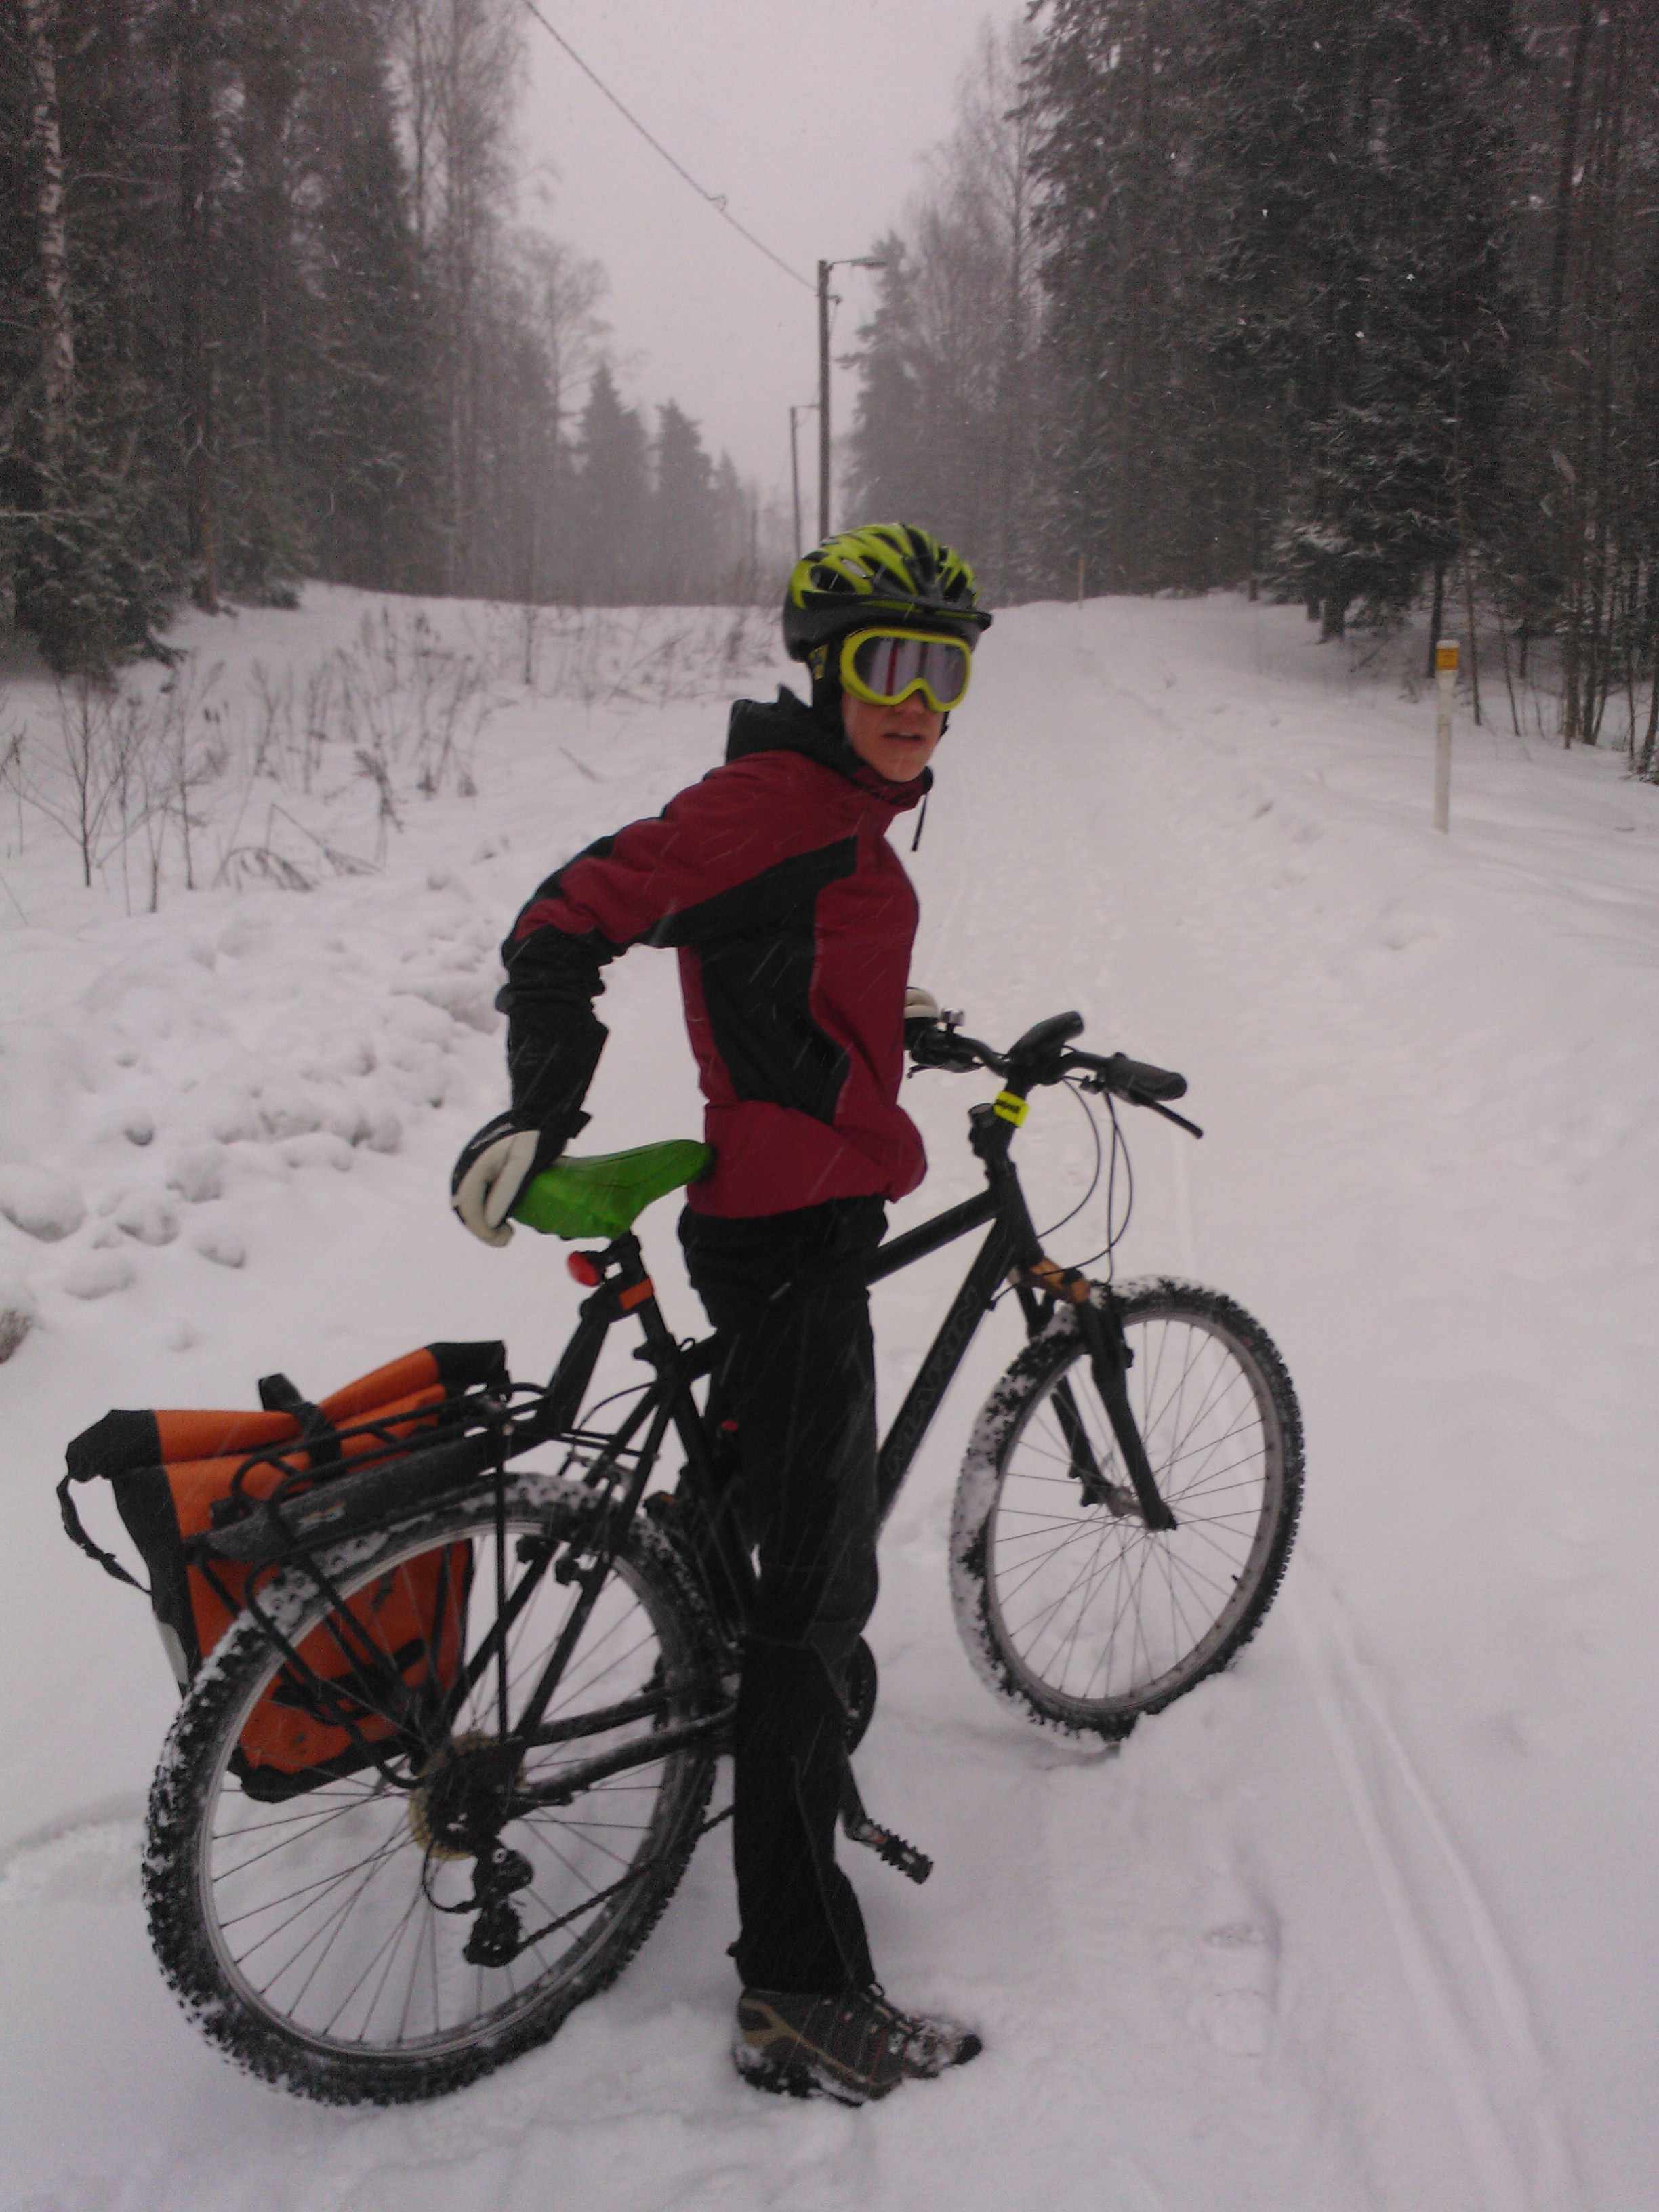 This is me cycling to work in Finland in -23 °C, back in January 2012